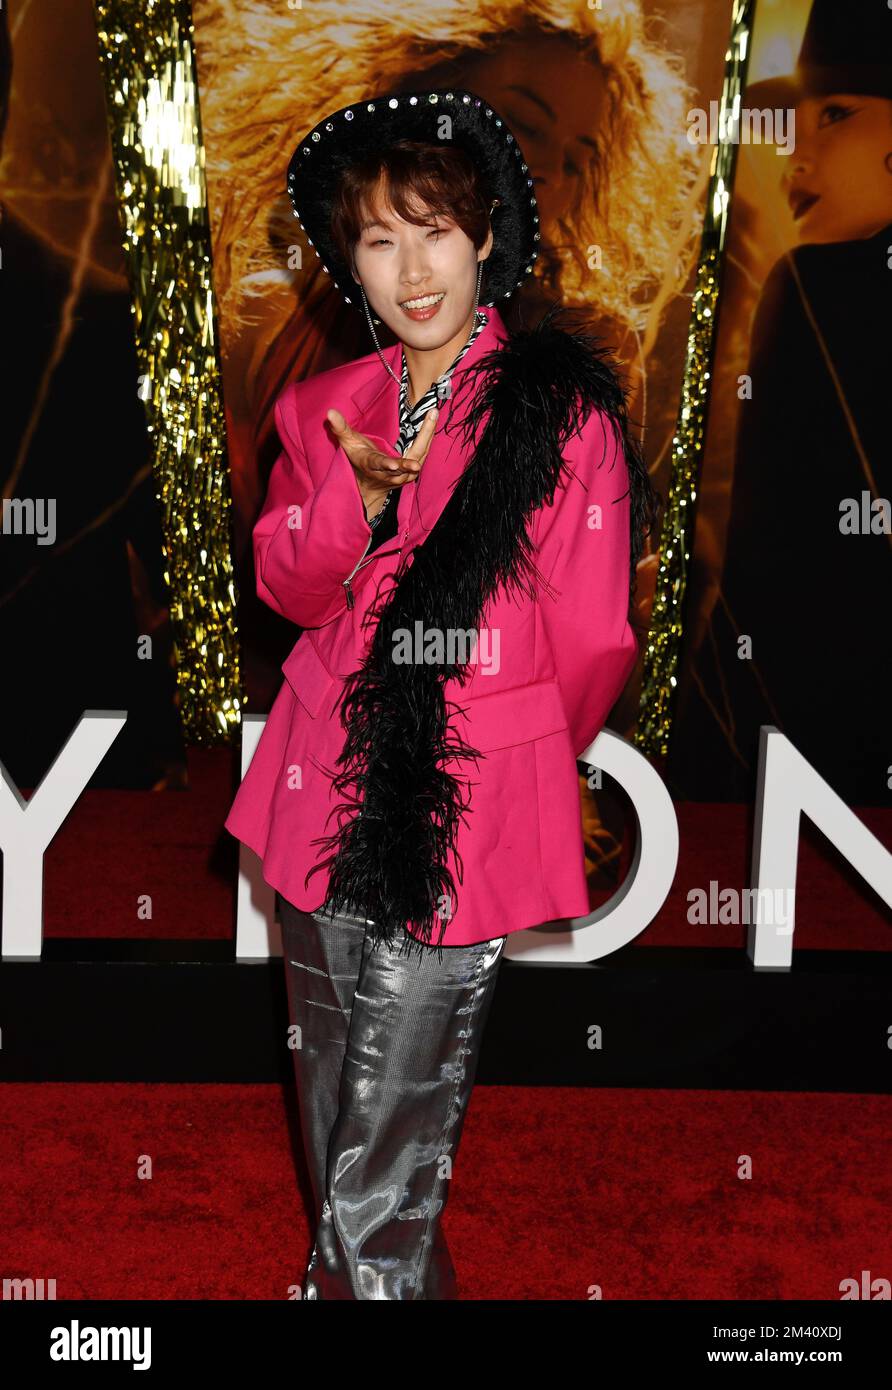 LOS ANGELES, CALIFORNIA - DECEMBER 15: Lee Eun-Jae attends the Global Premiere Screening of 'Babylon' at Academy Museum of Motion Pictures on December Stock Photo